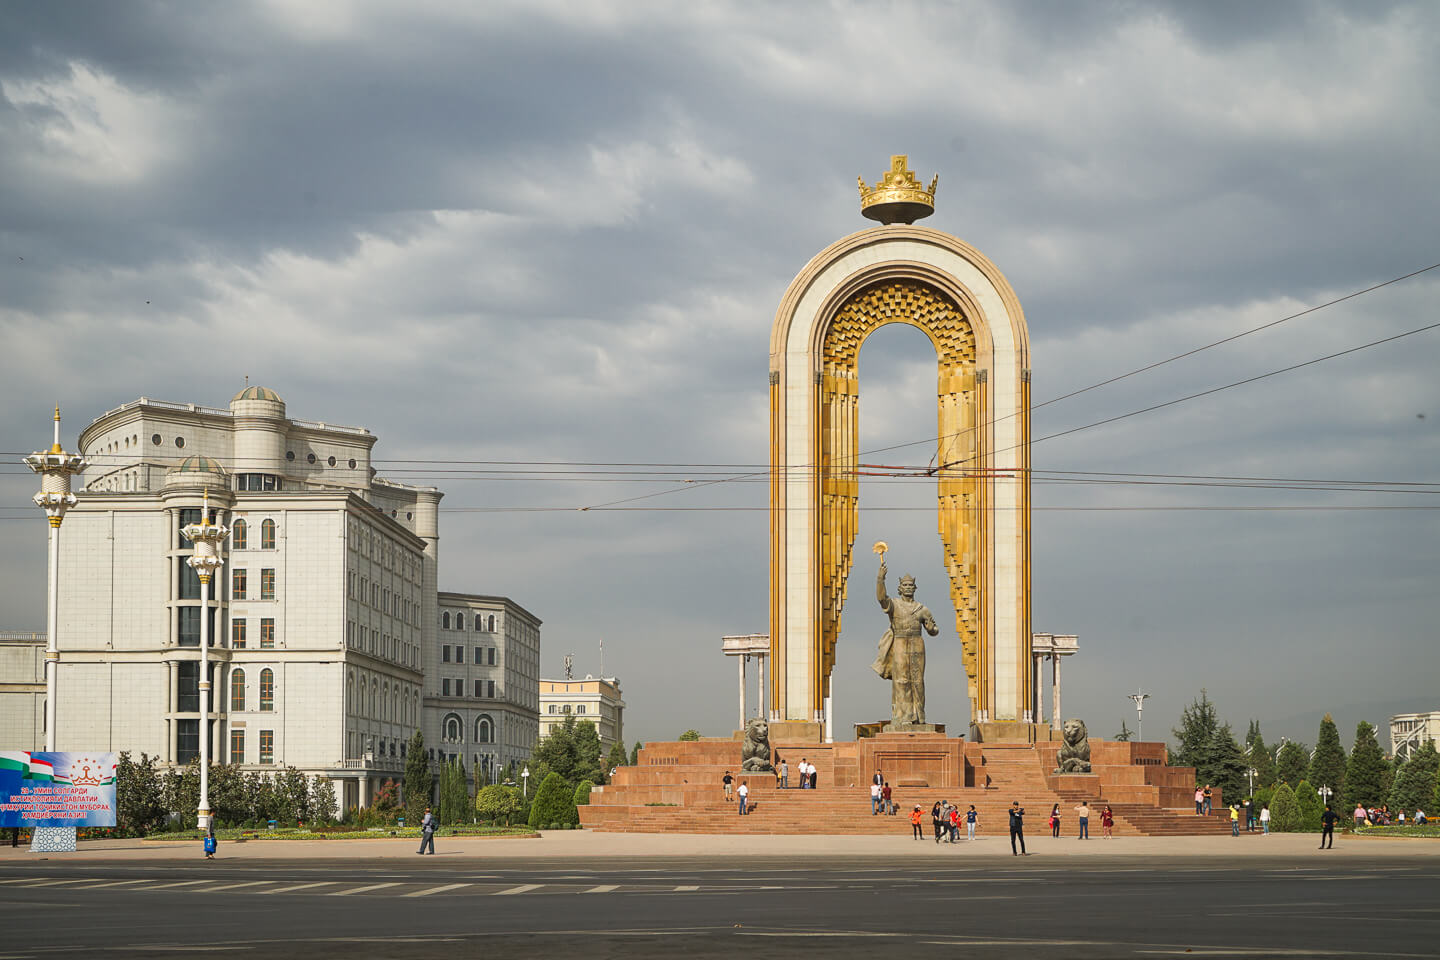 Dushanbe city center with golden statue of Ismail Somoni